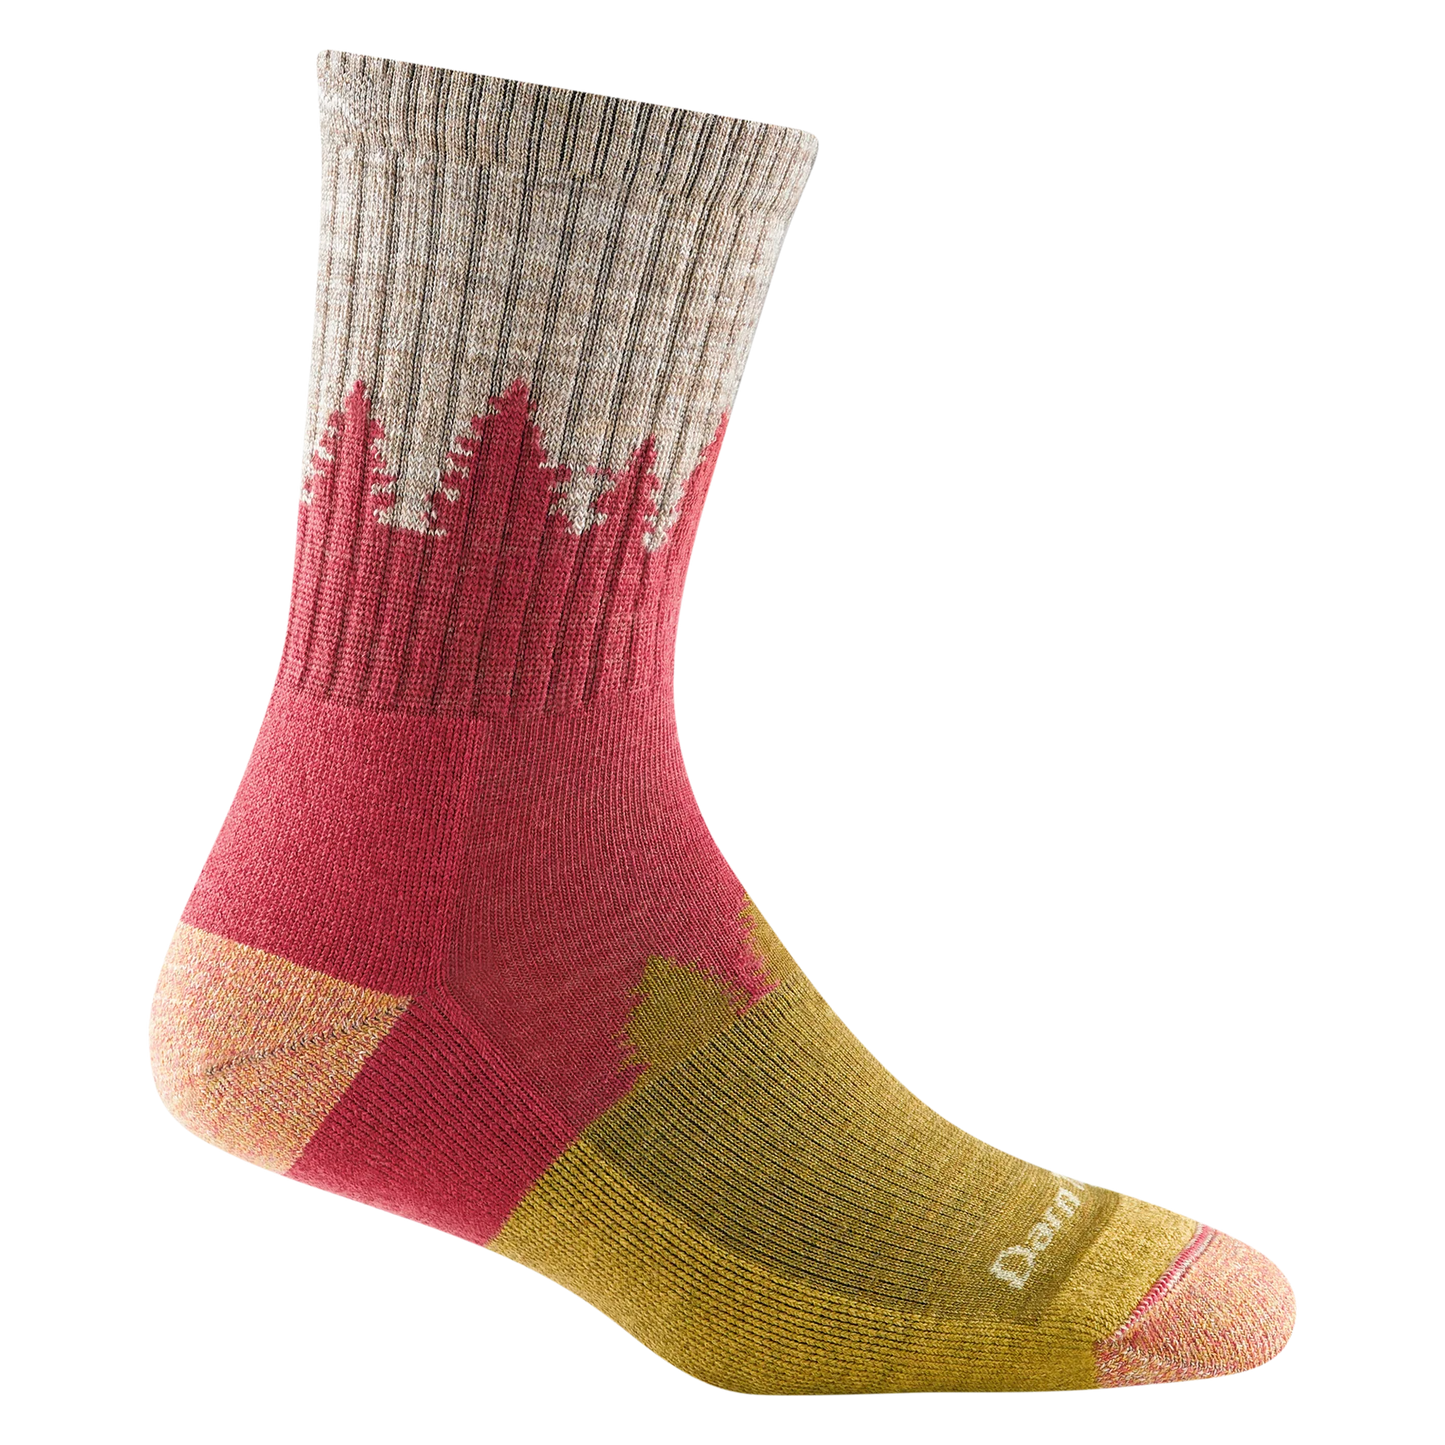 Darn Tough Womans Treeline Micro Crew Midweight Hiking Sock, Cranberry & shades of brown, side view